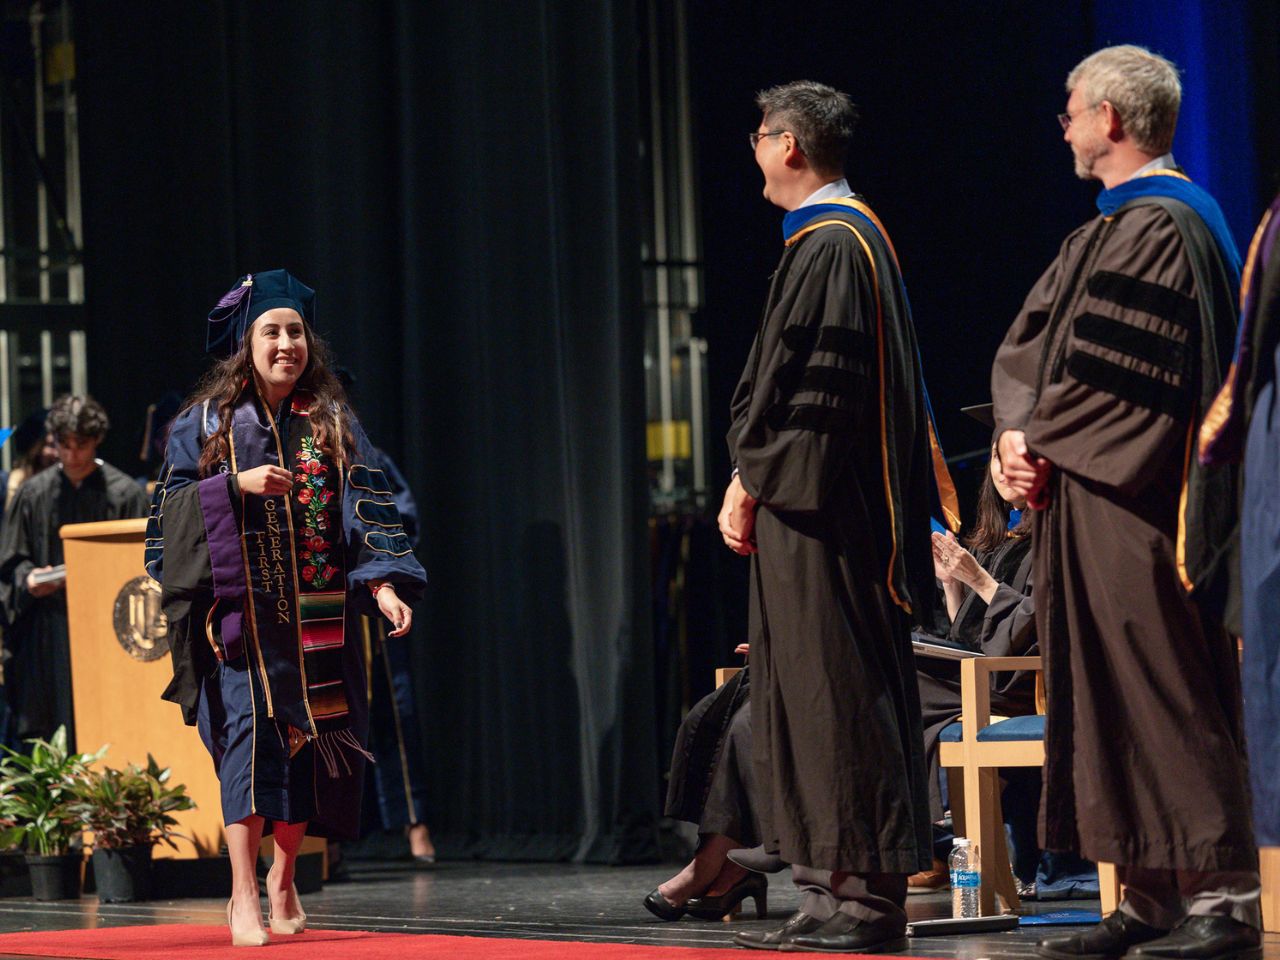 A student in a blue commencement gown and regalia, including a stole with the words "First Generation" walks across the stage at the ˽̳ Davis School of Law commencement ceremony.